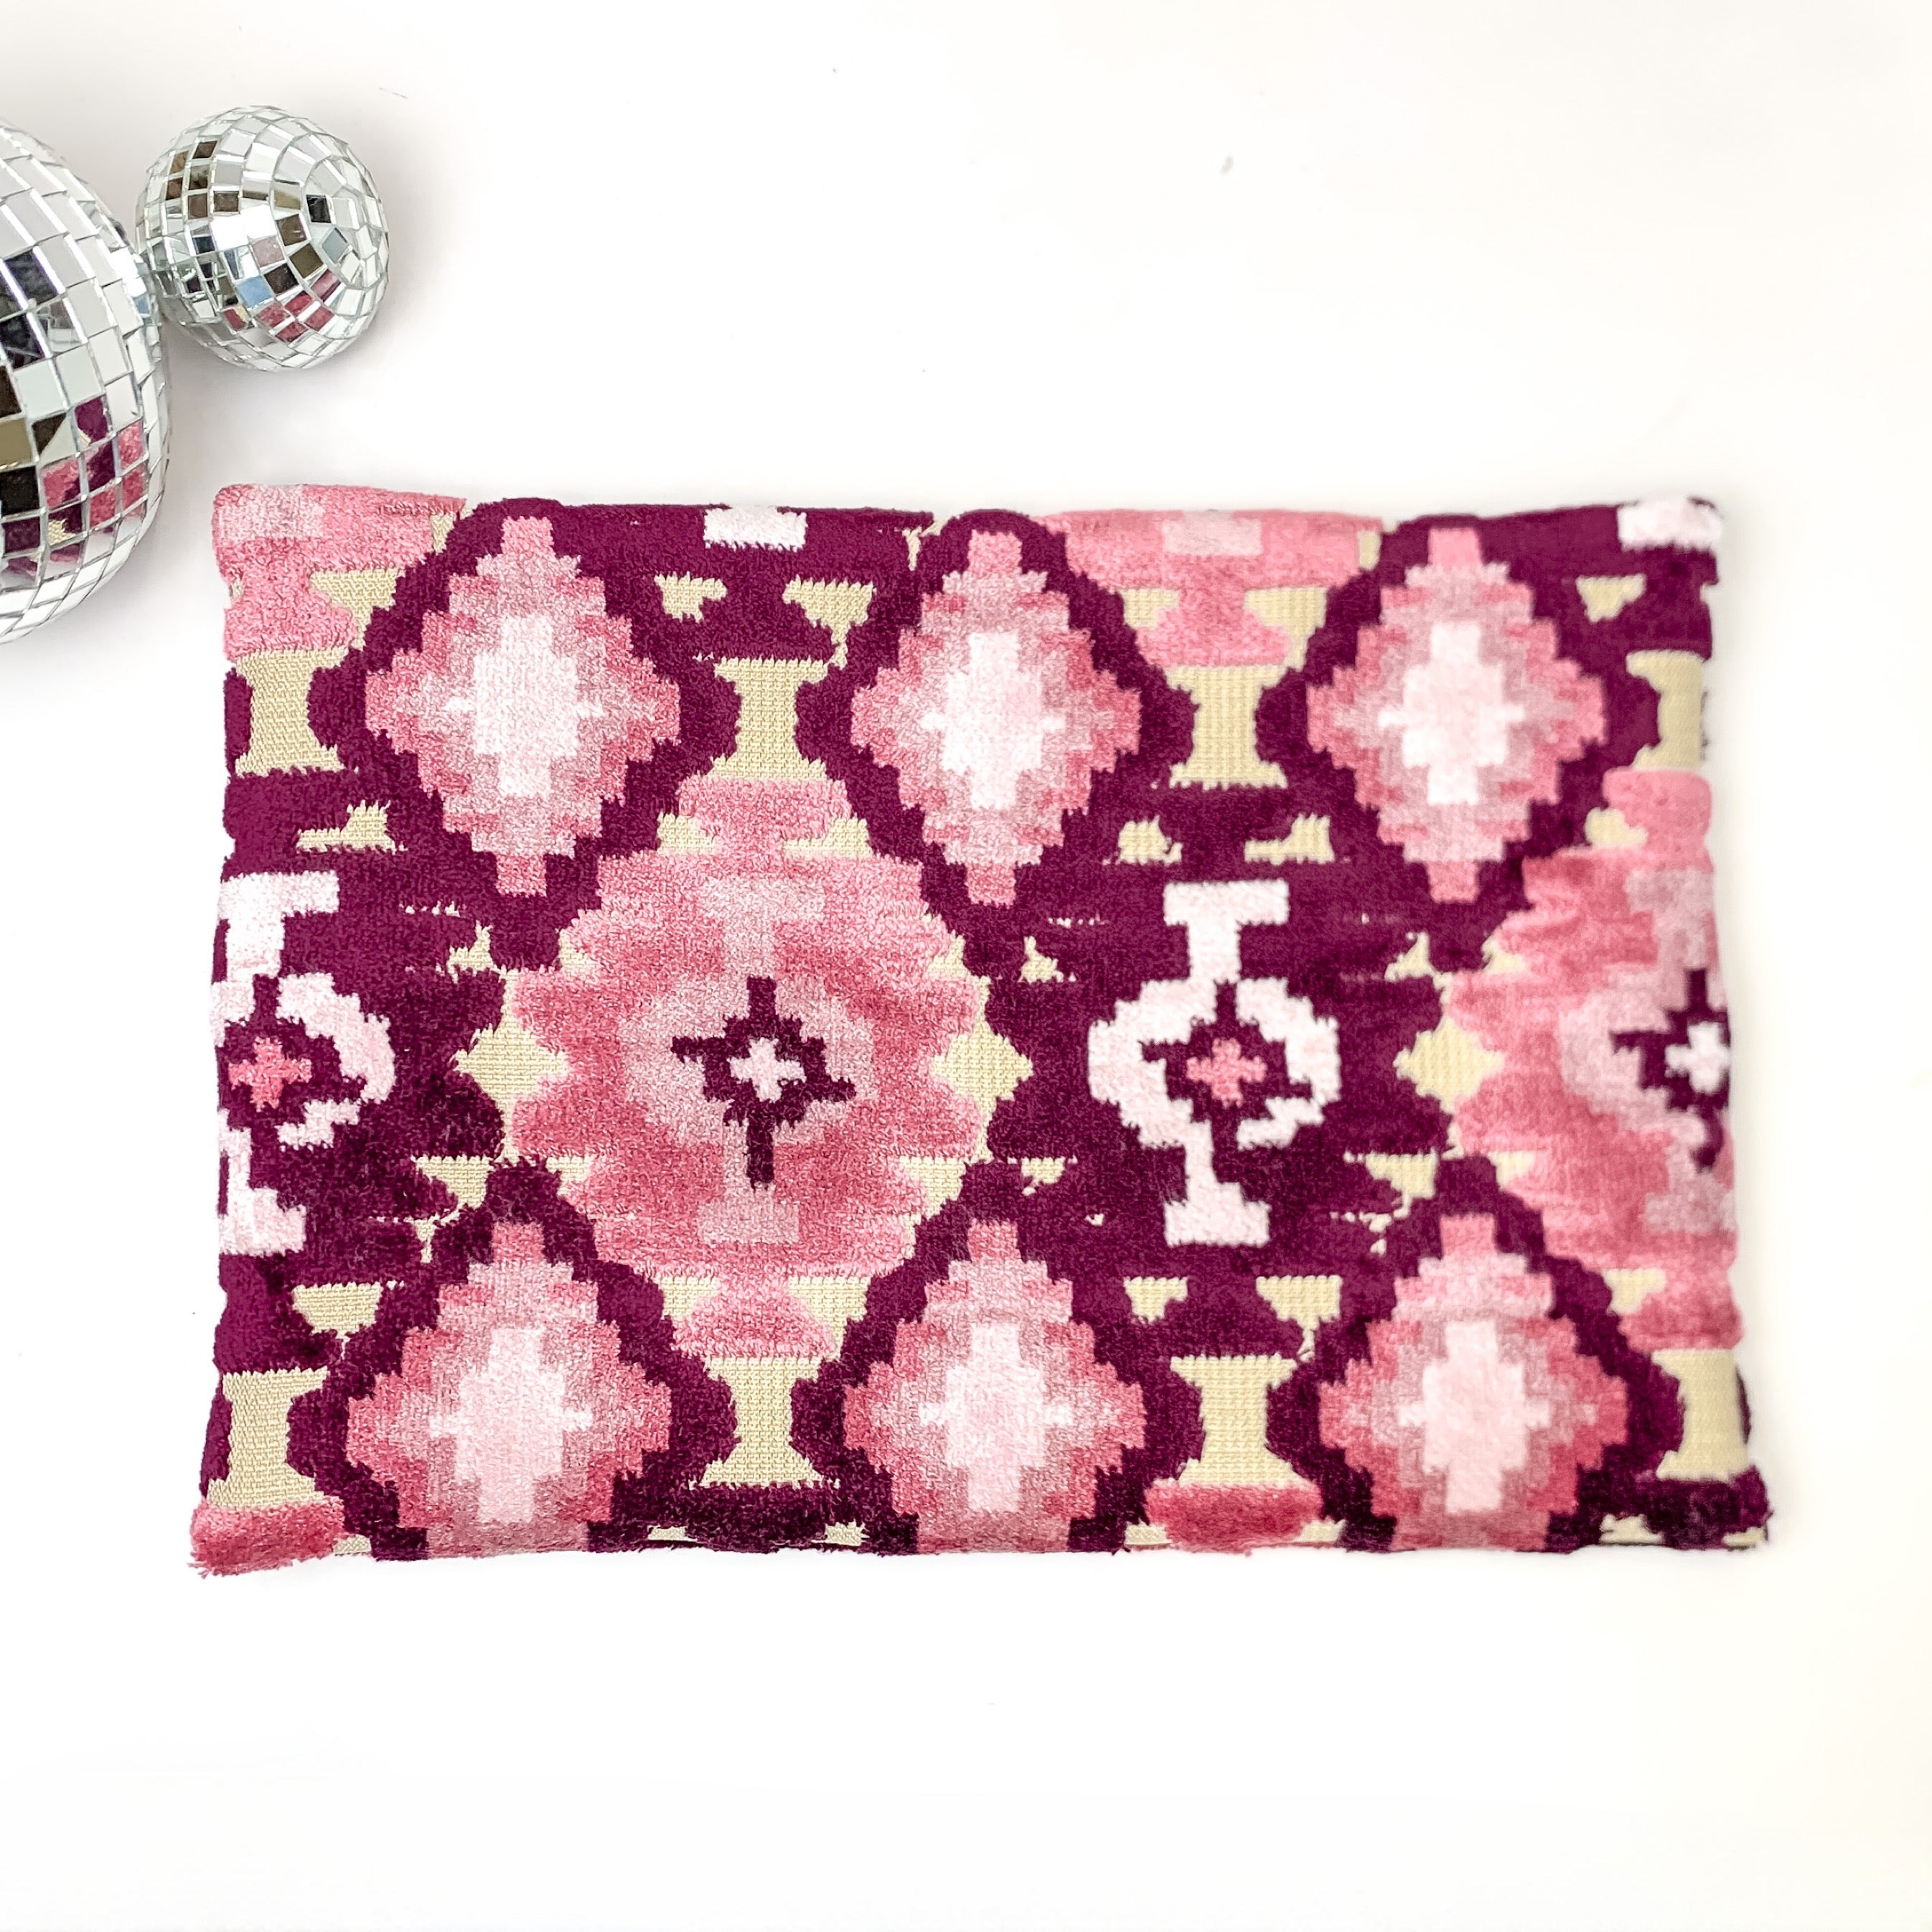 Makeup Junkie | Medium Maroon Aztec Lay Flat Bag in Maroon and Pink Mix - Giddy Up Glamour Boutique